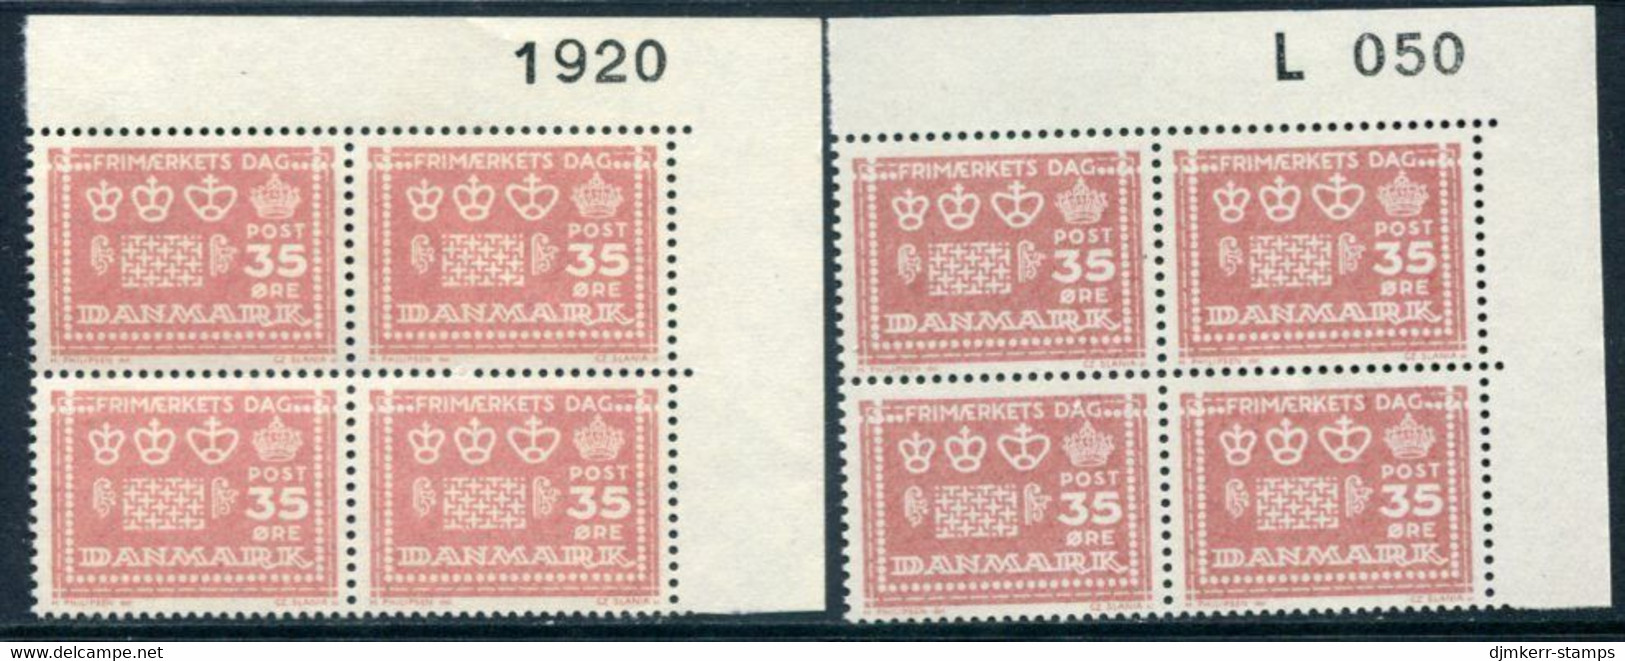 DENMARK 1964 Stamp Day Both Papers In Blocks Of 4 With Control Number MNH / **. Michel 424x,y - Neufs